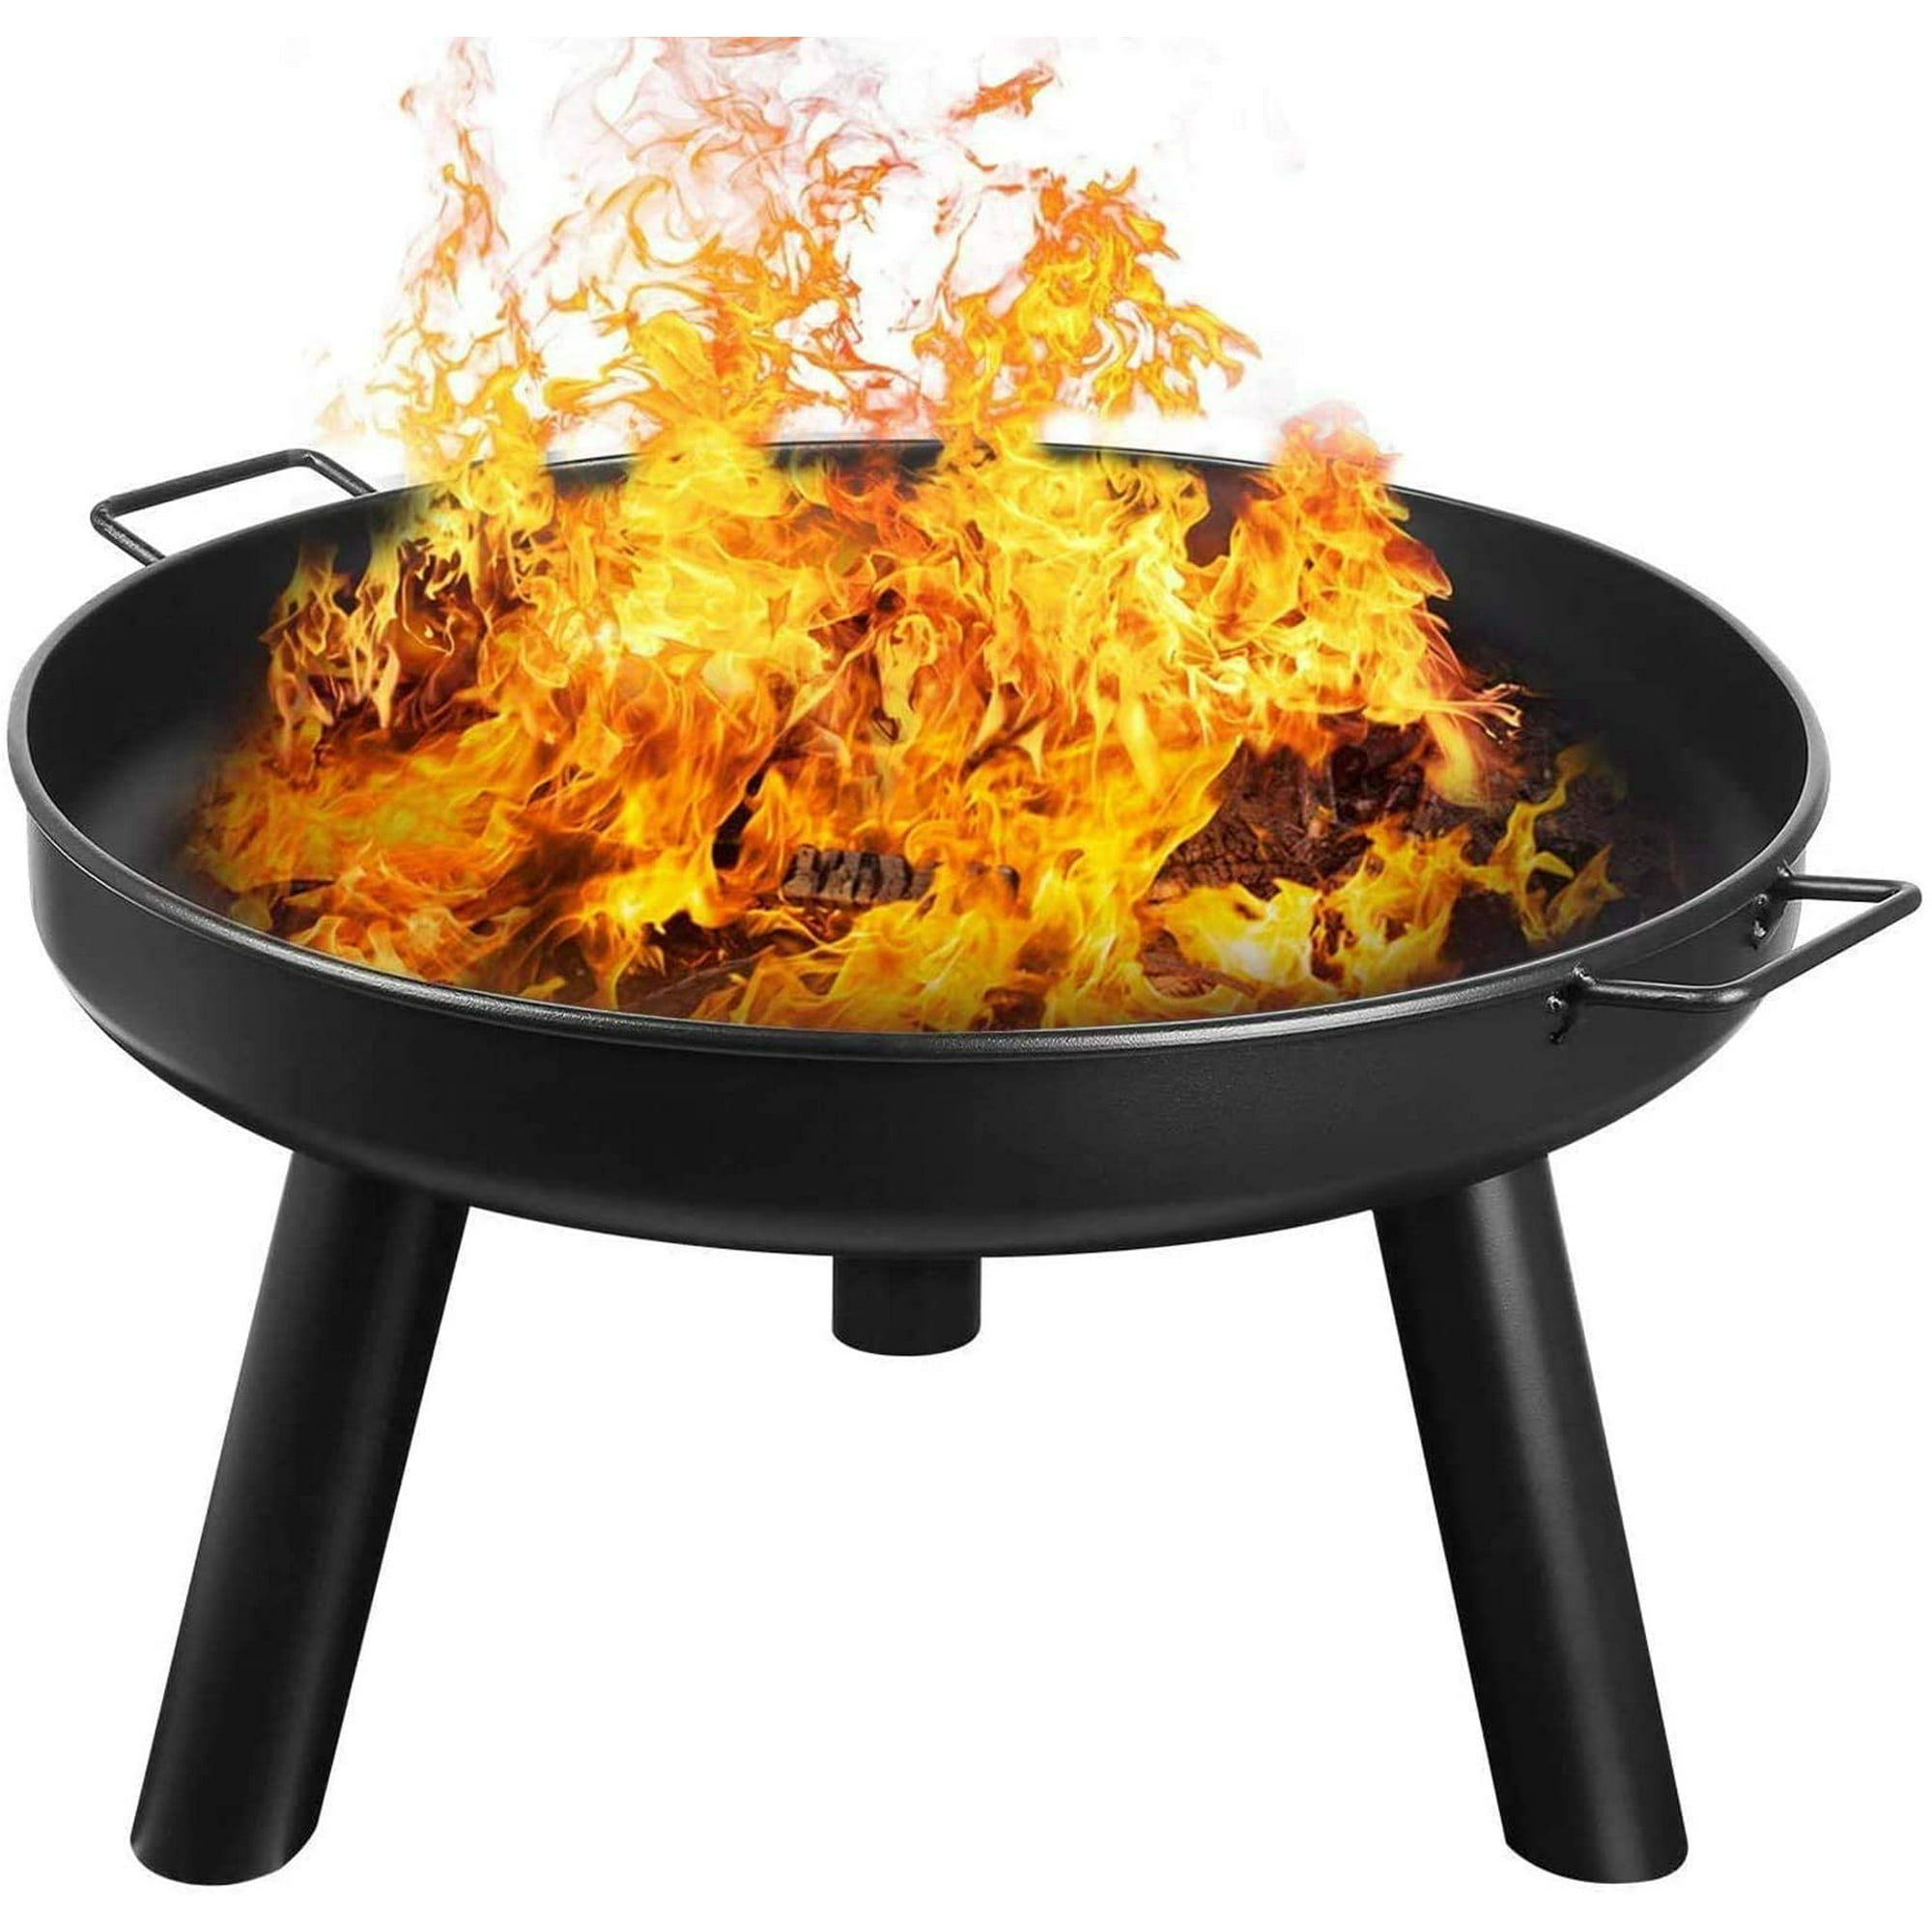 Fire Pit Outdoor Wood Burning Bowl, Heavy Cast Iron Fire Pit